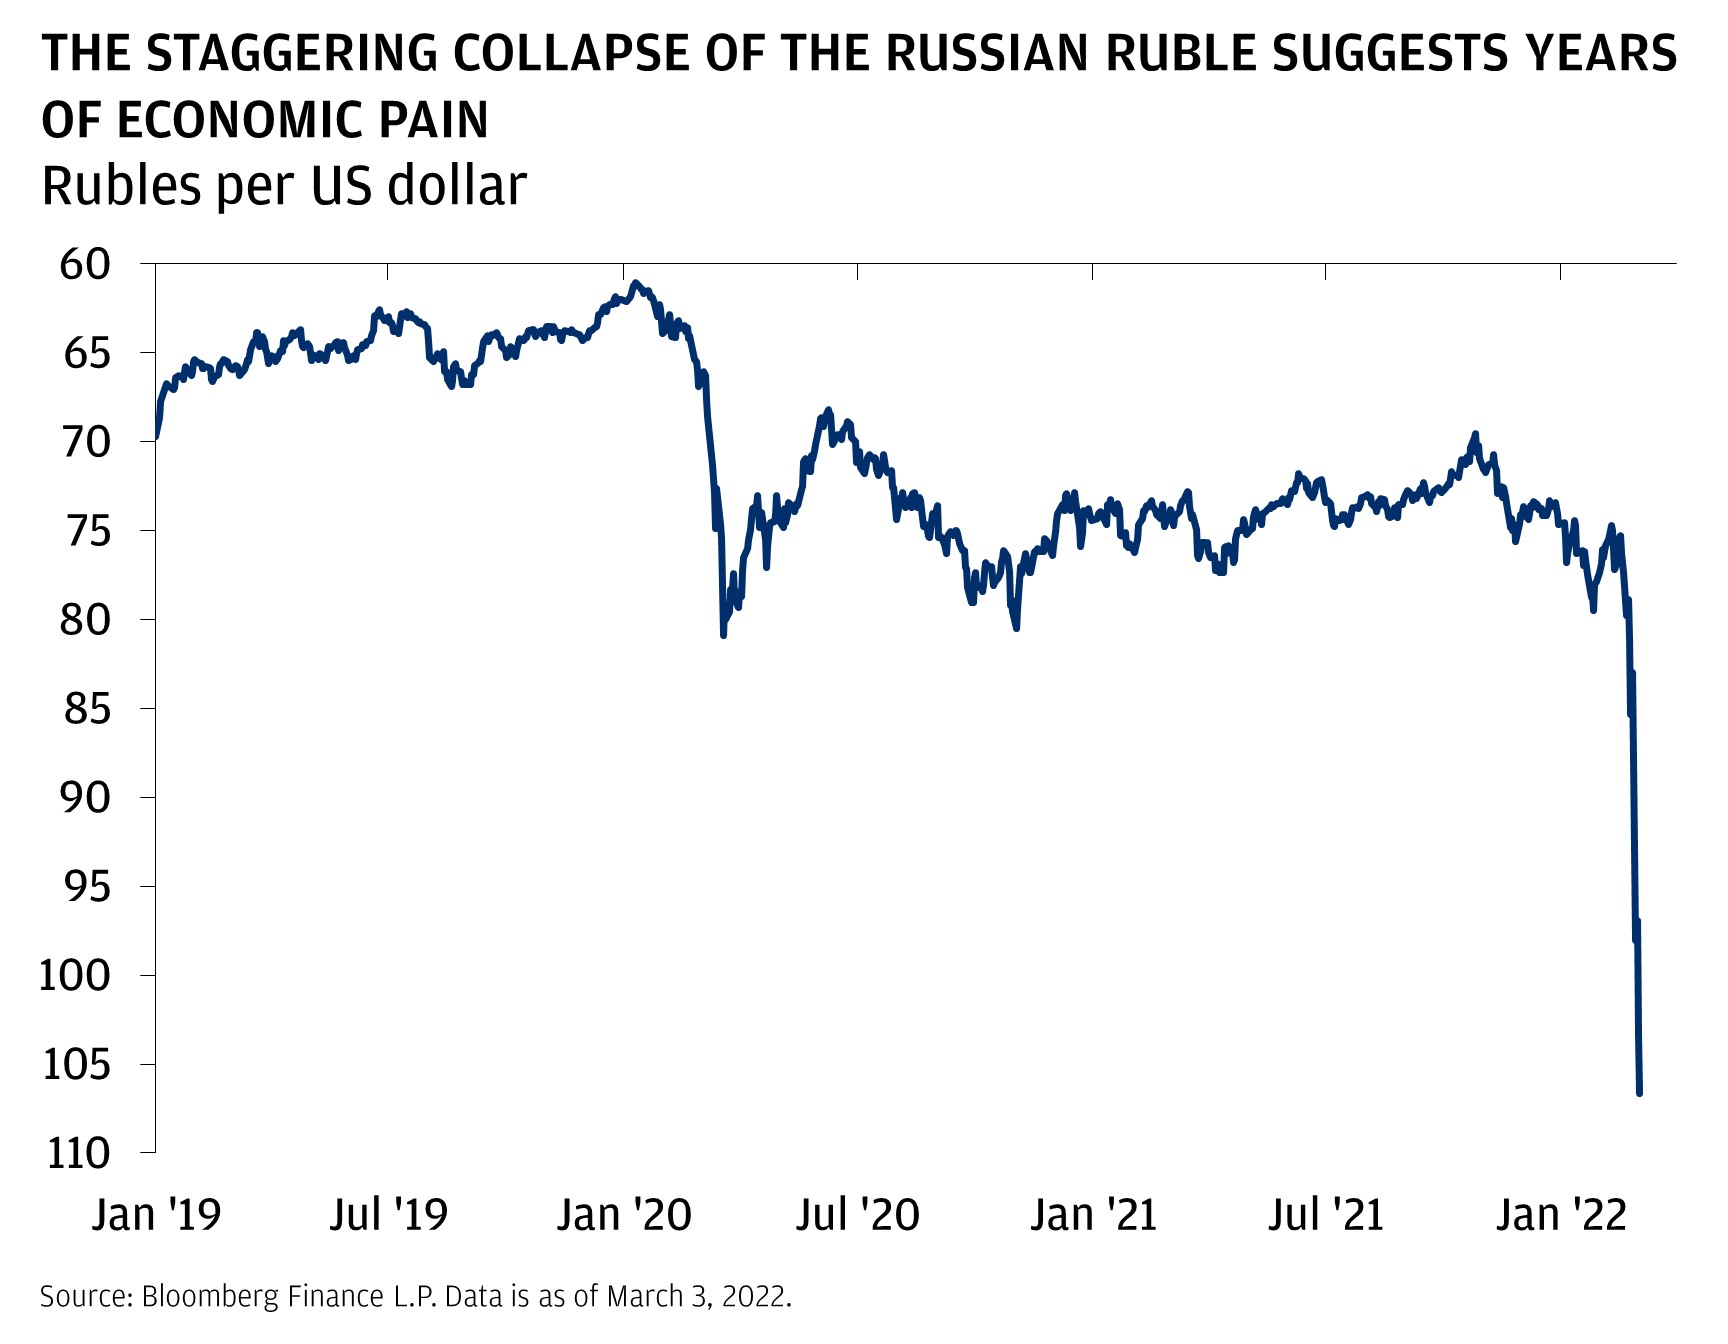 THE STAGGERING COLLAPSE OF THE RUSSIAN RUBLE SUGGESTS YEARS OF ECONOMIC PAIN